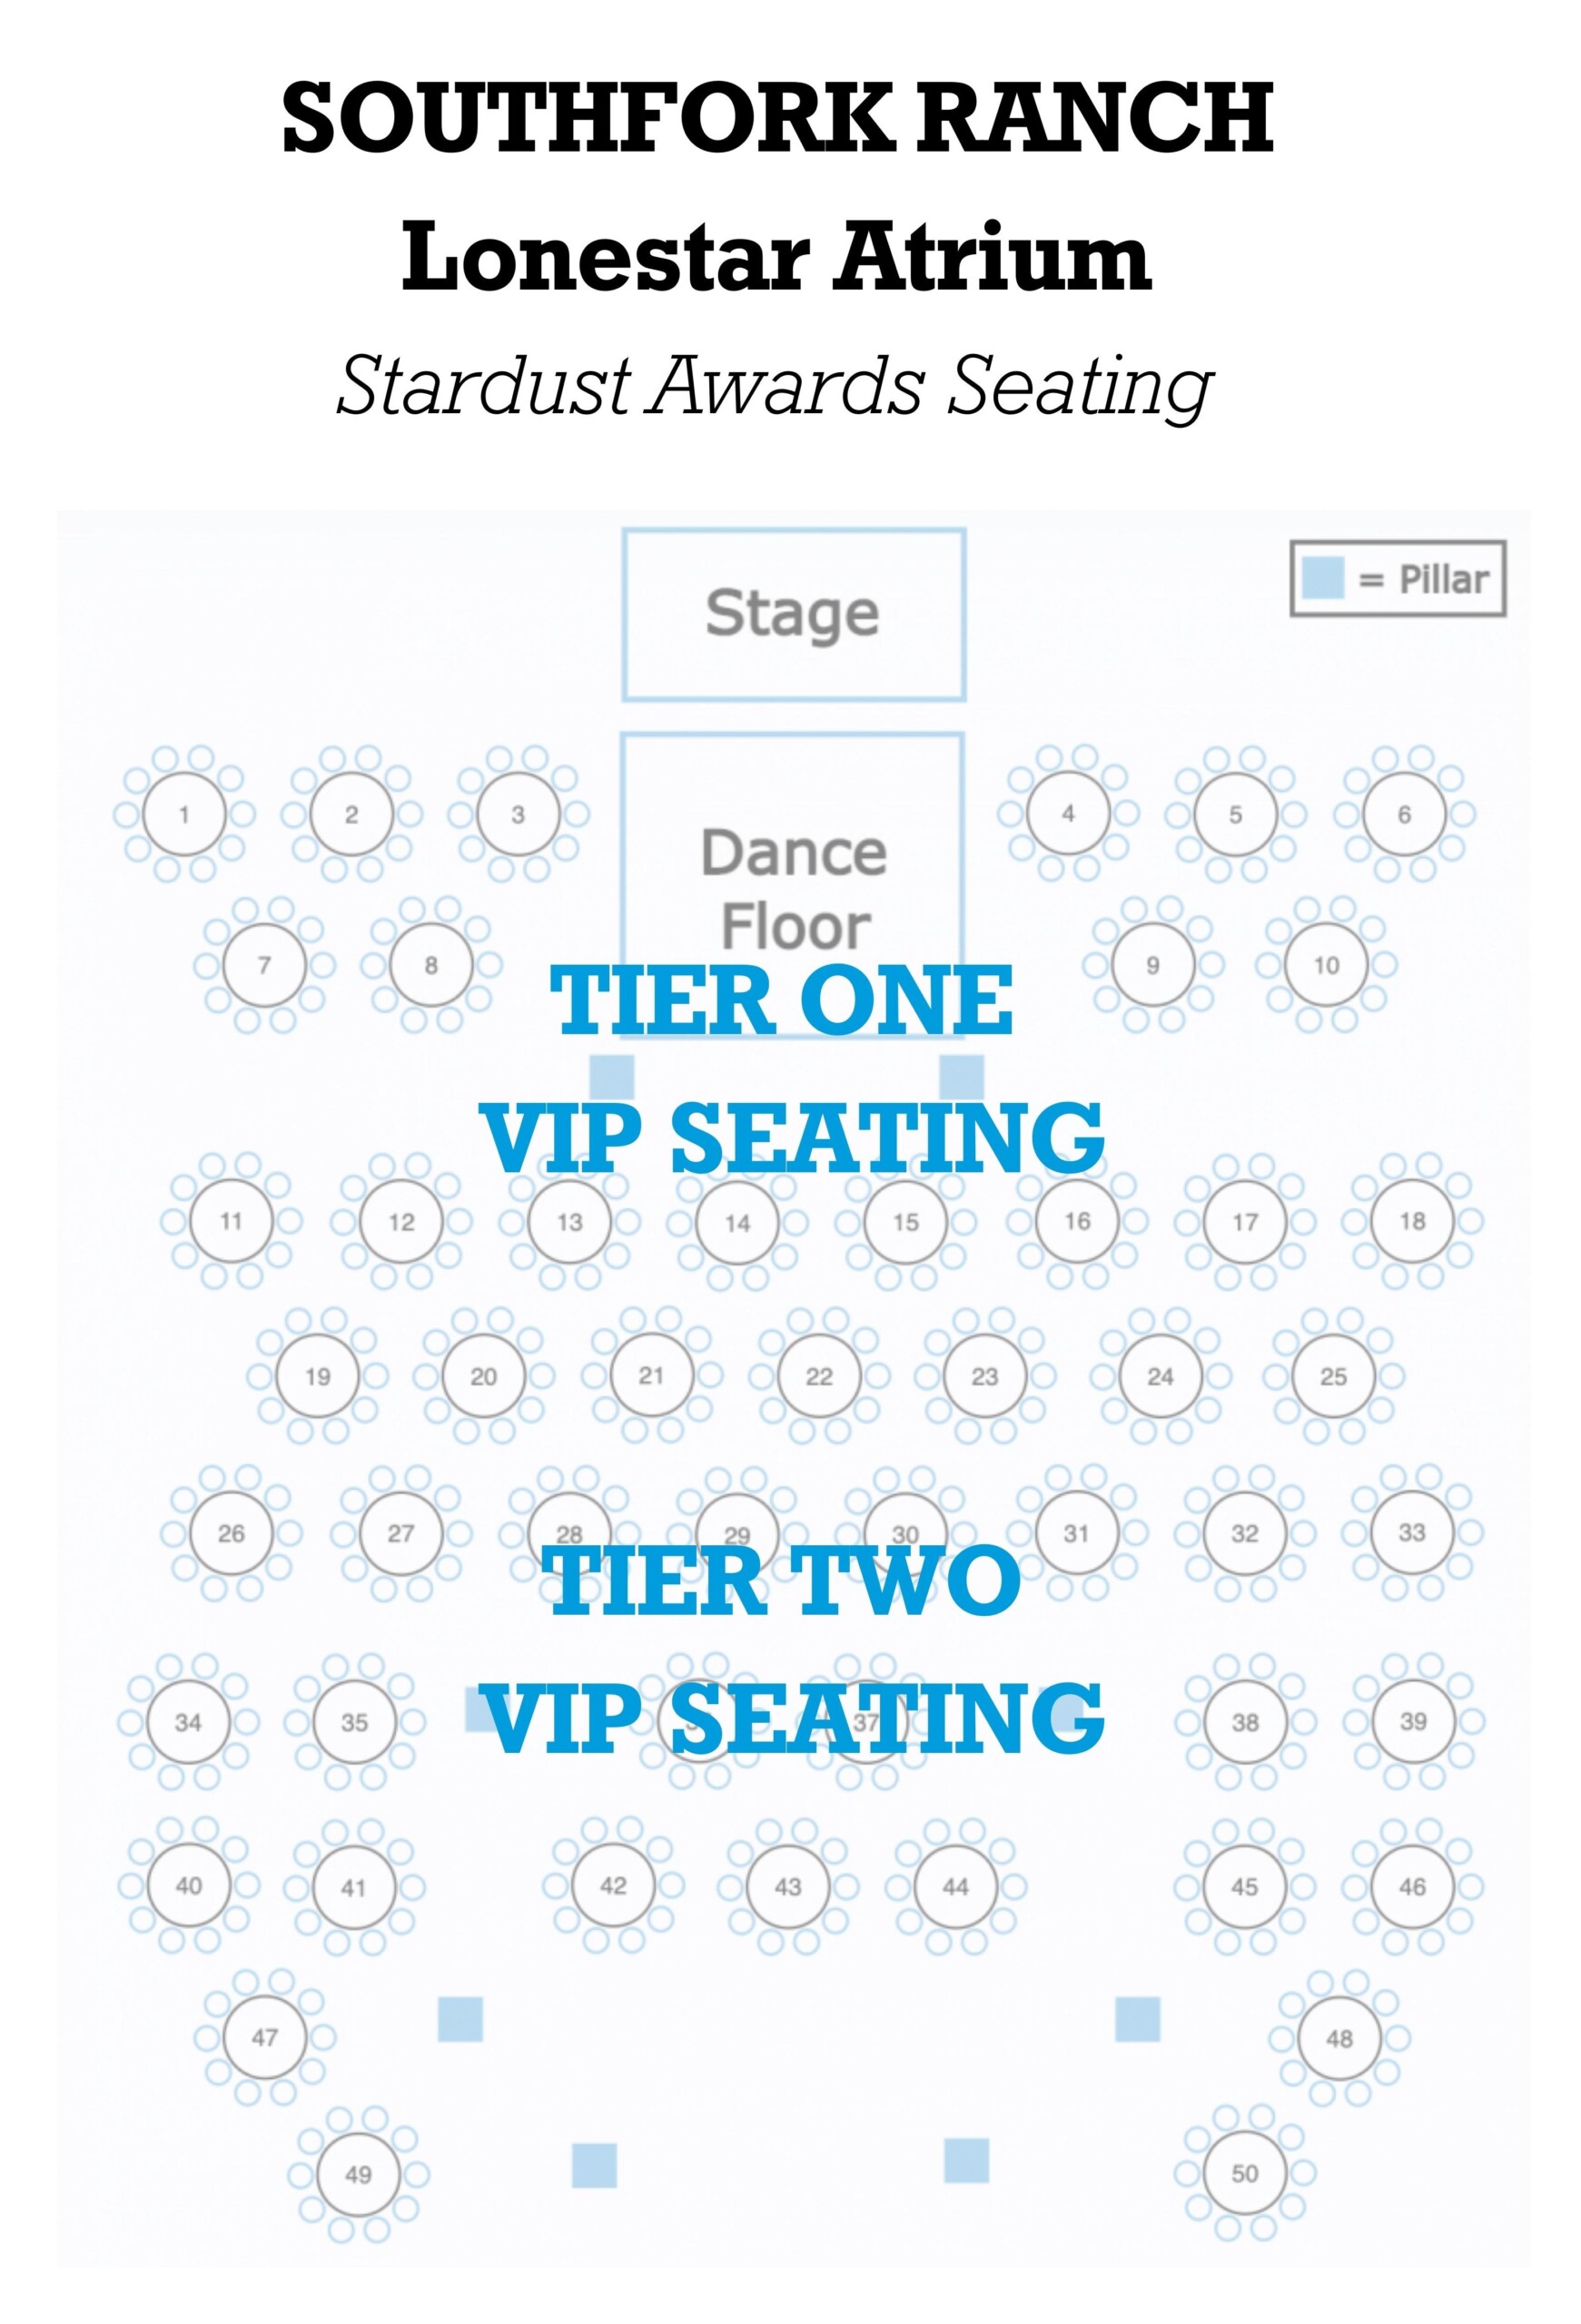 2022 Stardust Awards Seating Chart